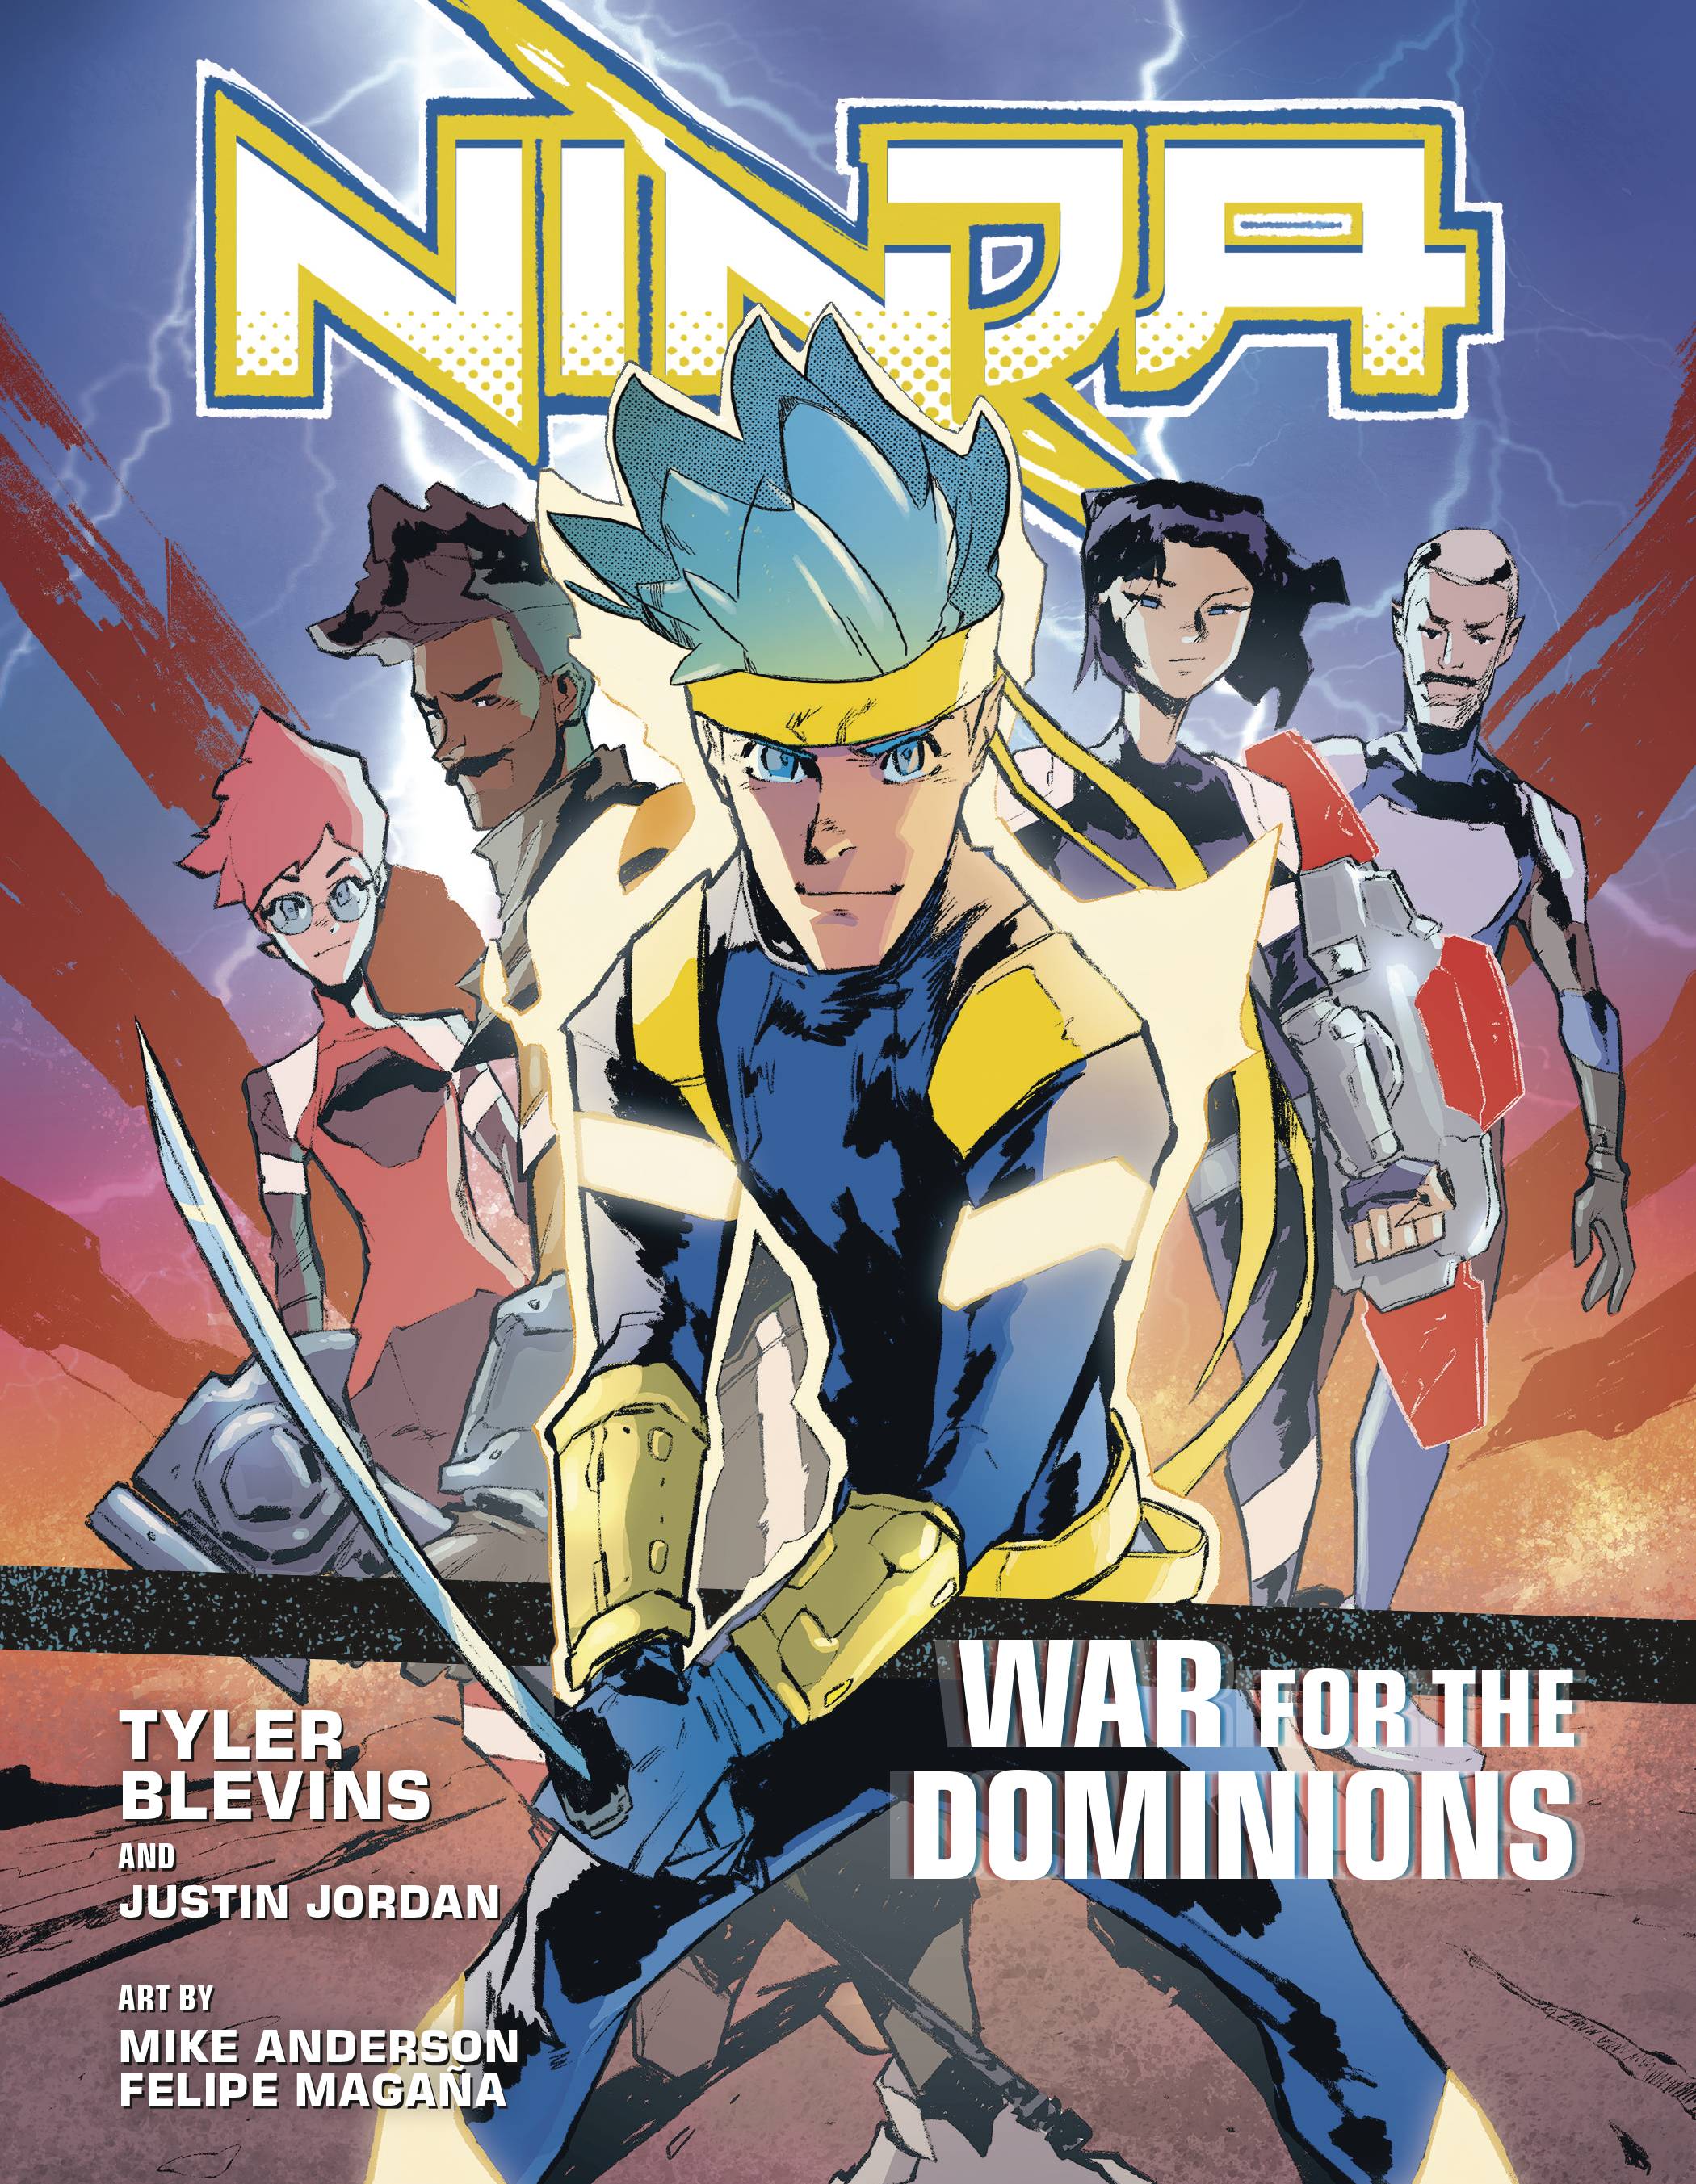 NINJA GN 02 WAR FOR THE DOMINIONS